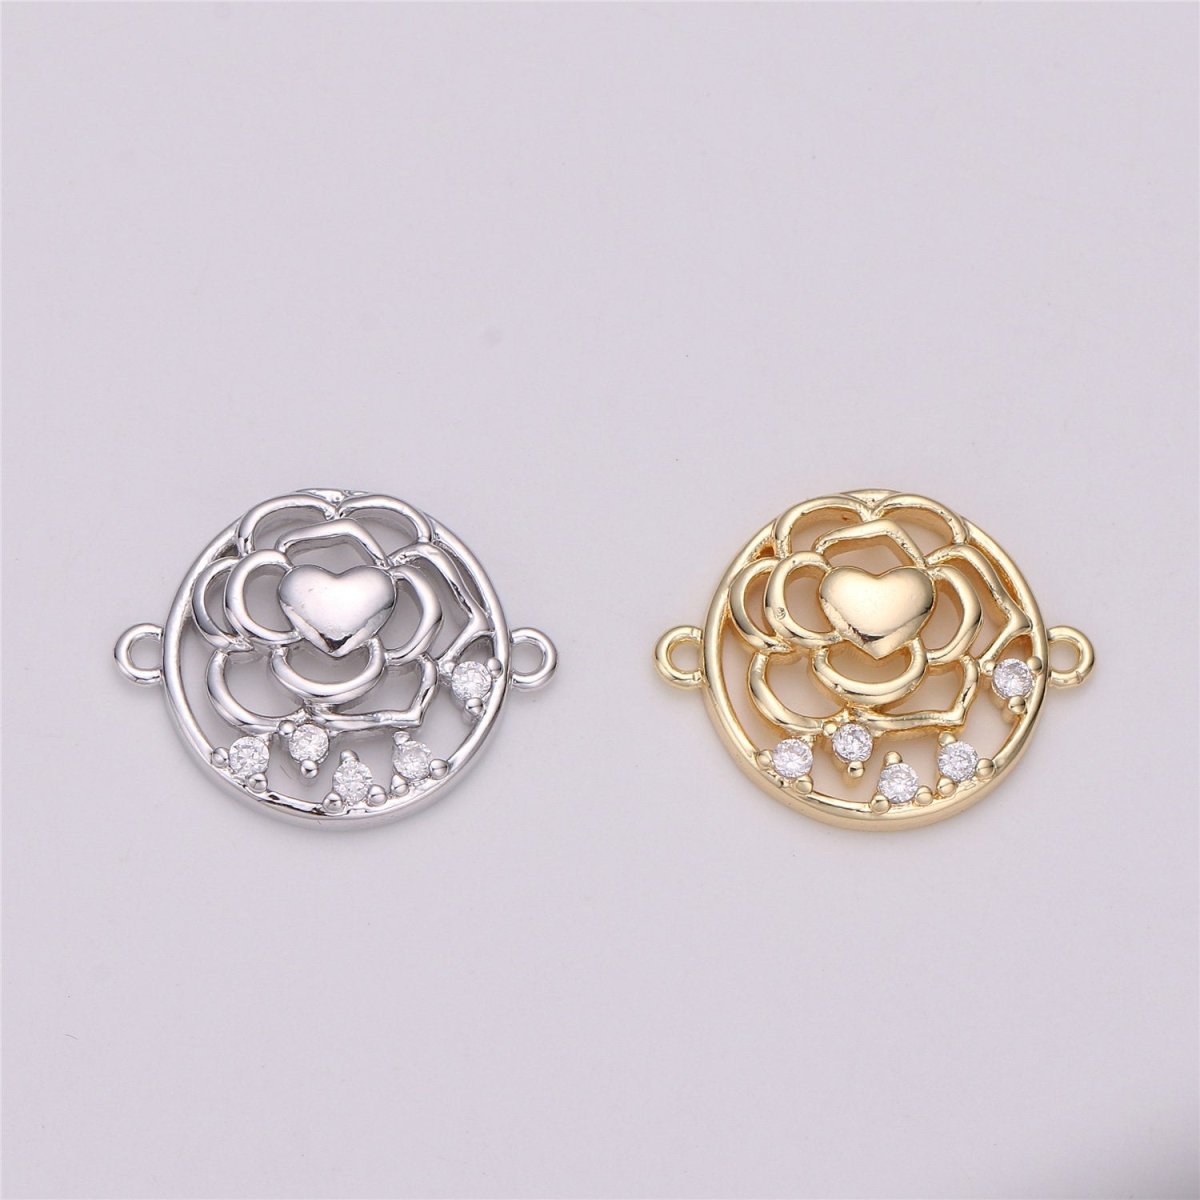 Dainty 18k Gold filled Filigree Gold Flower with Heart Charms, Cutout, Flower Filigree Heart, Filigree Heart Connector, C-530 - DLUXCA